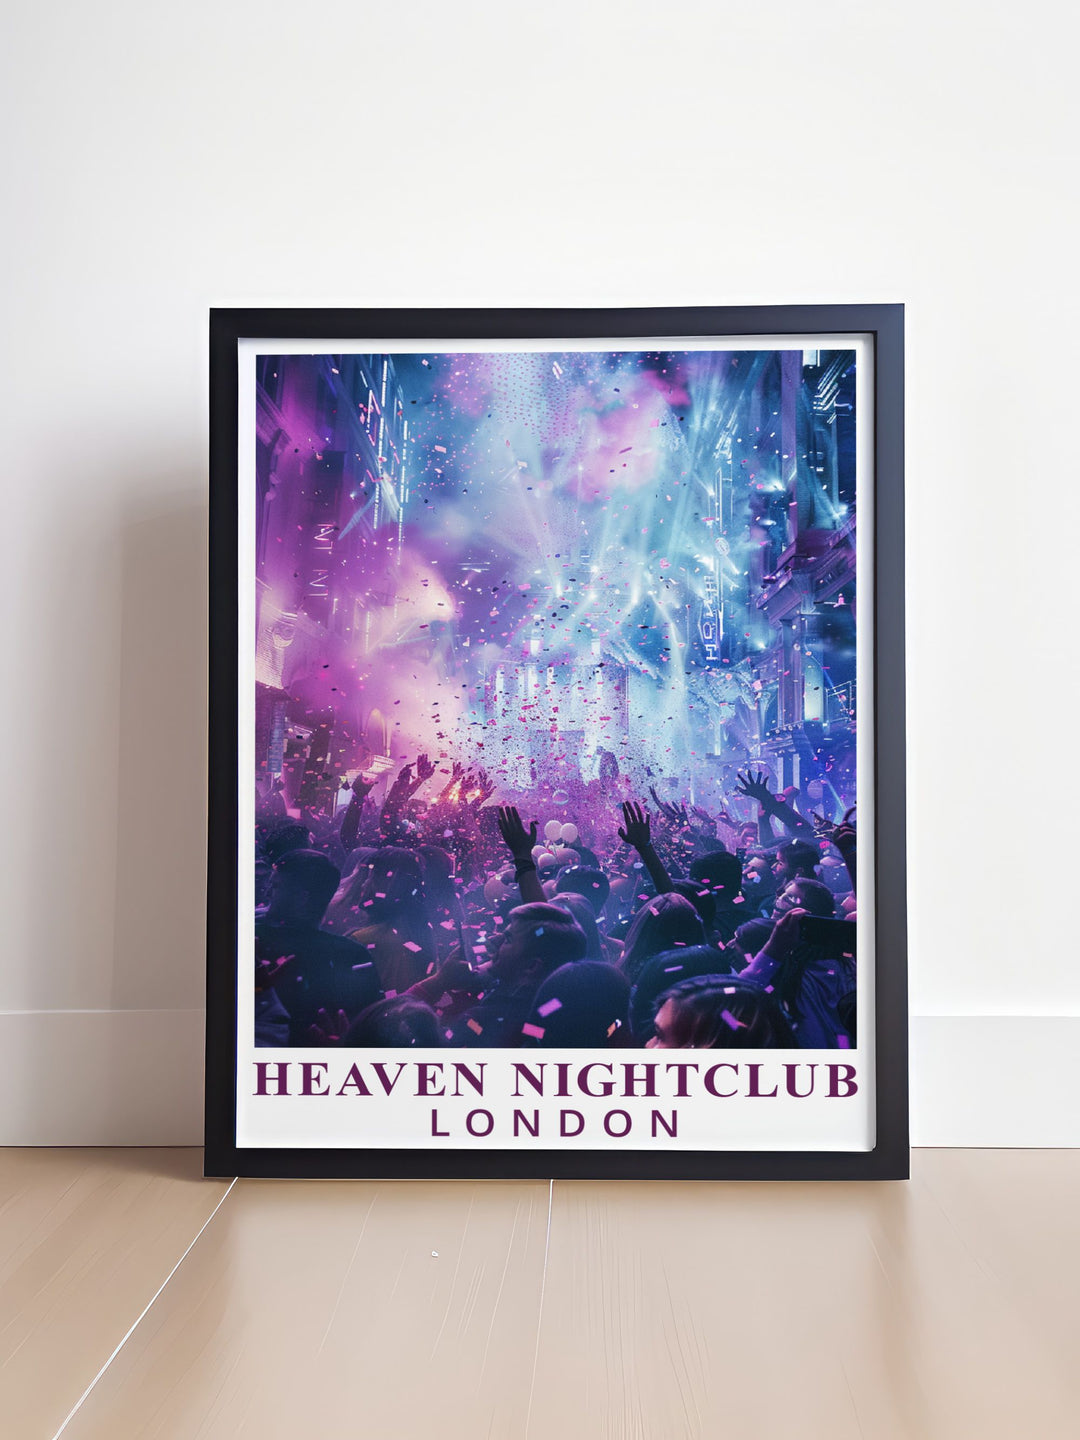 This detailed illustration of Londons Heaven Nightclub showcases the vibrant atmosphere and rich history of one of the citys most famous nightclubs.